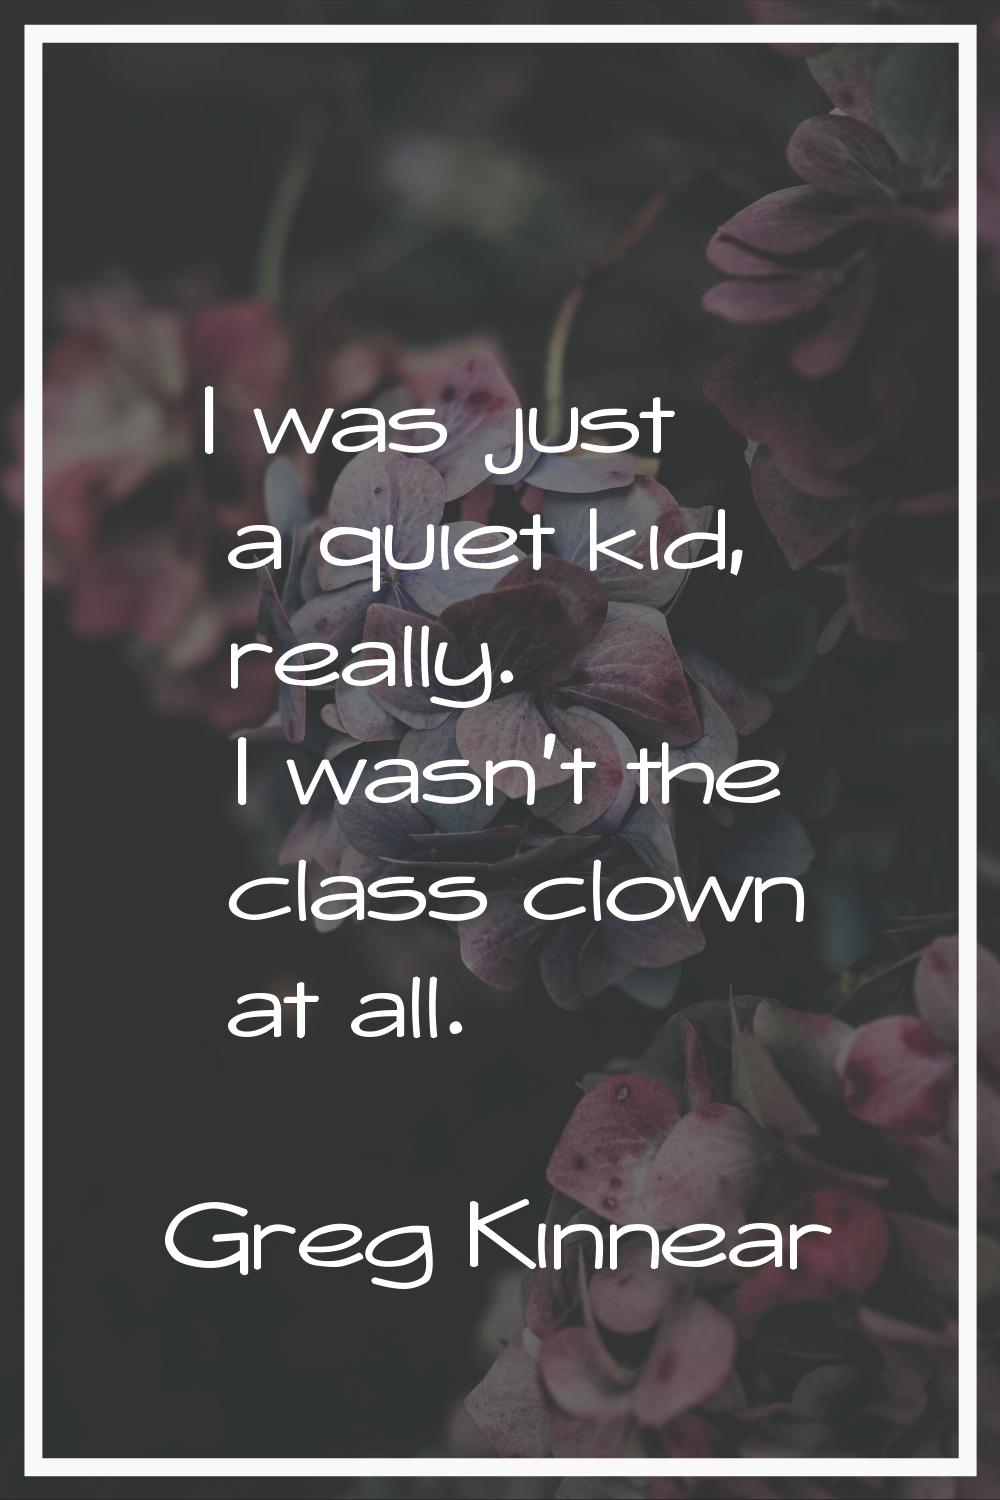 I was just a quiet kid, really. I wasn't the class clown at all.